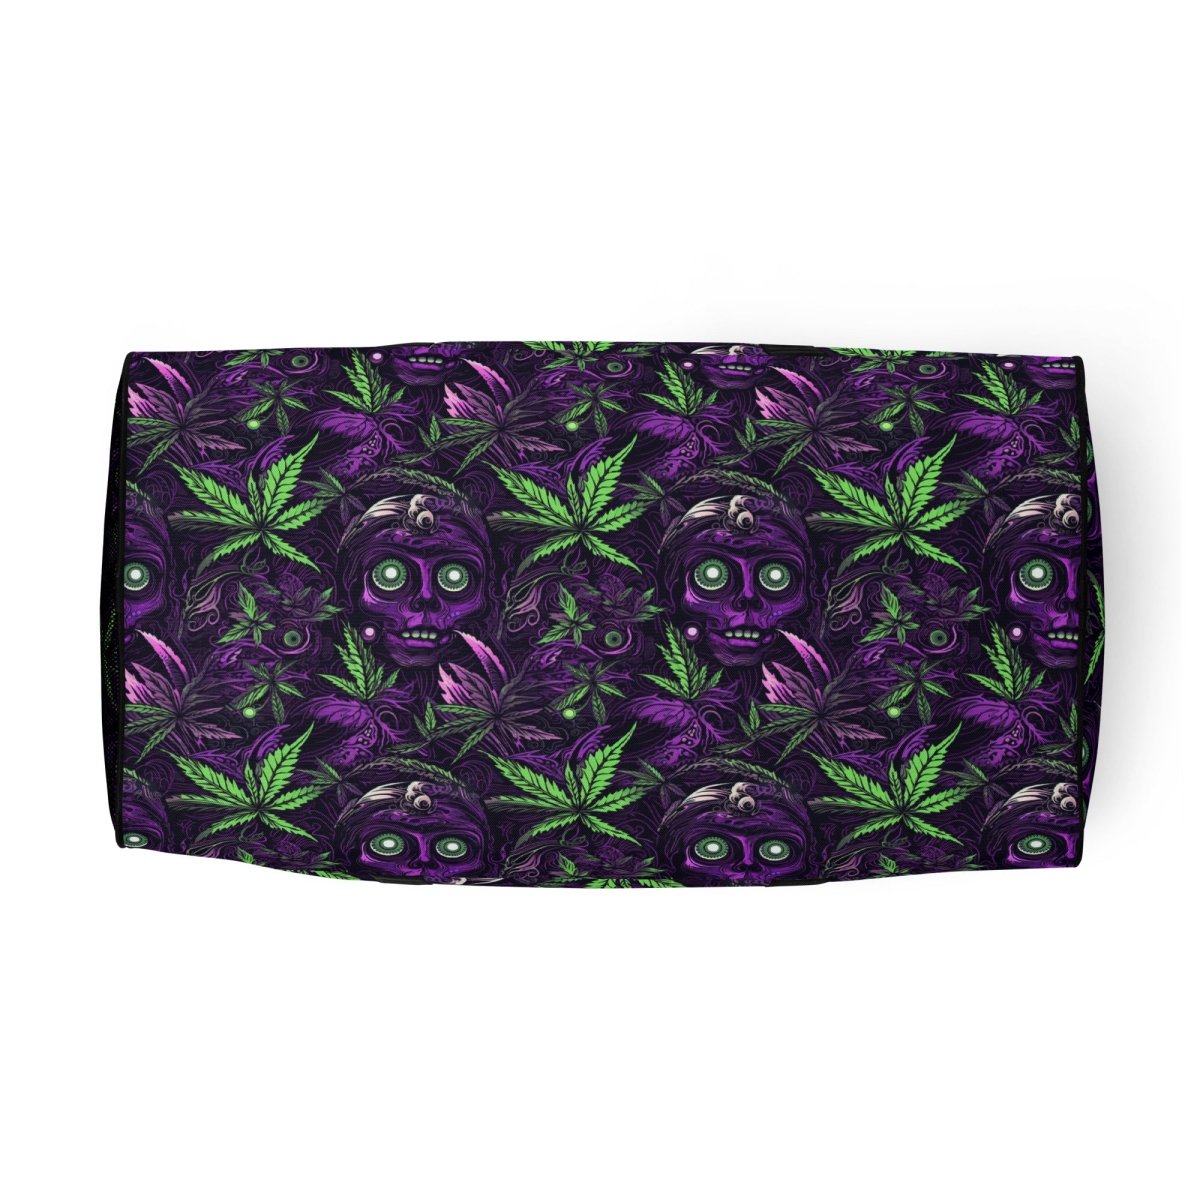 Leaves & Creature Duffle bag - Mainly High